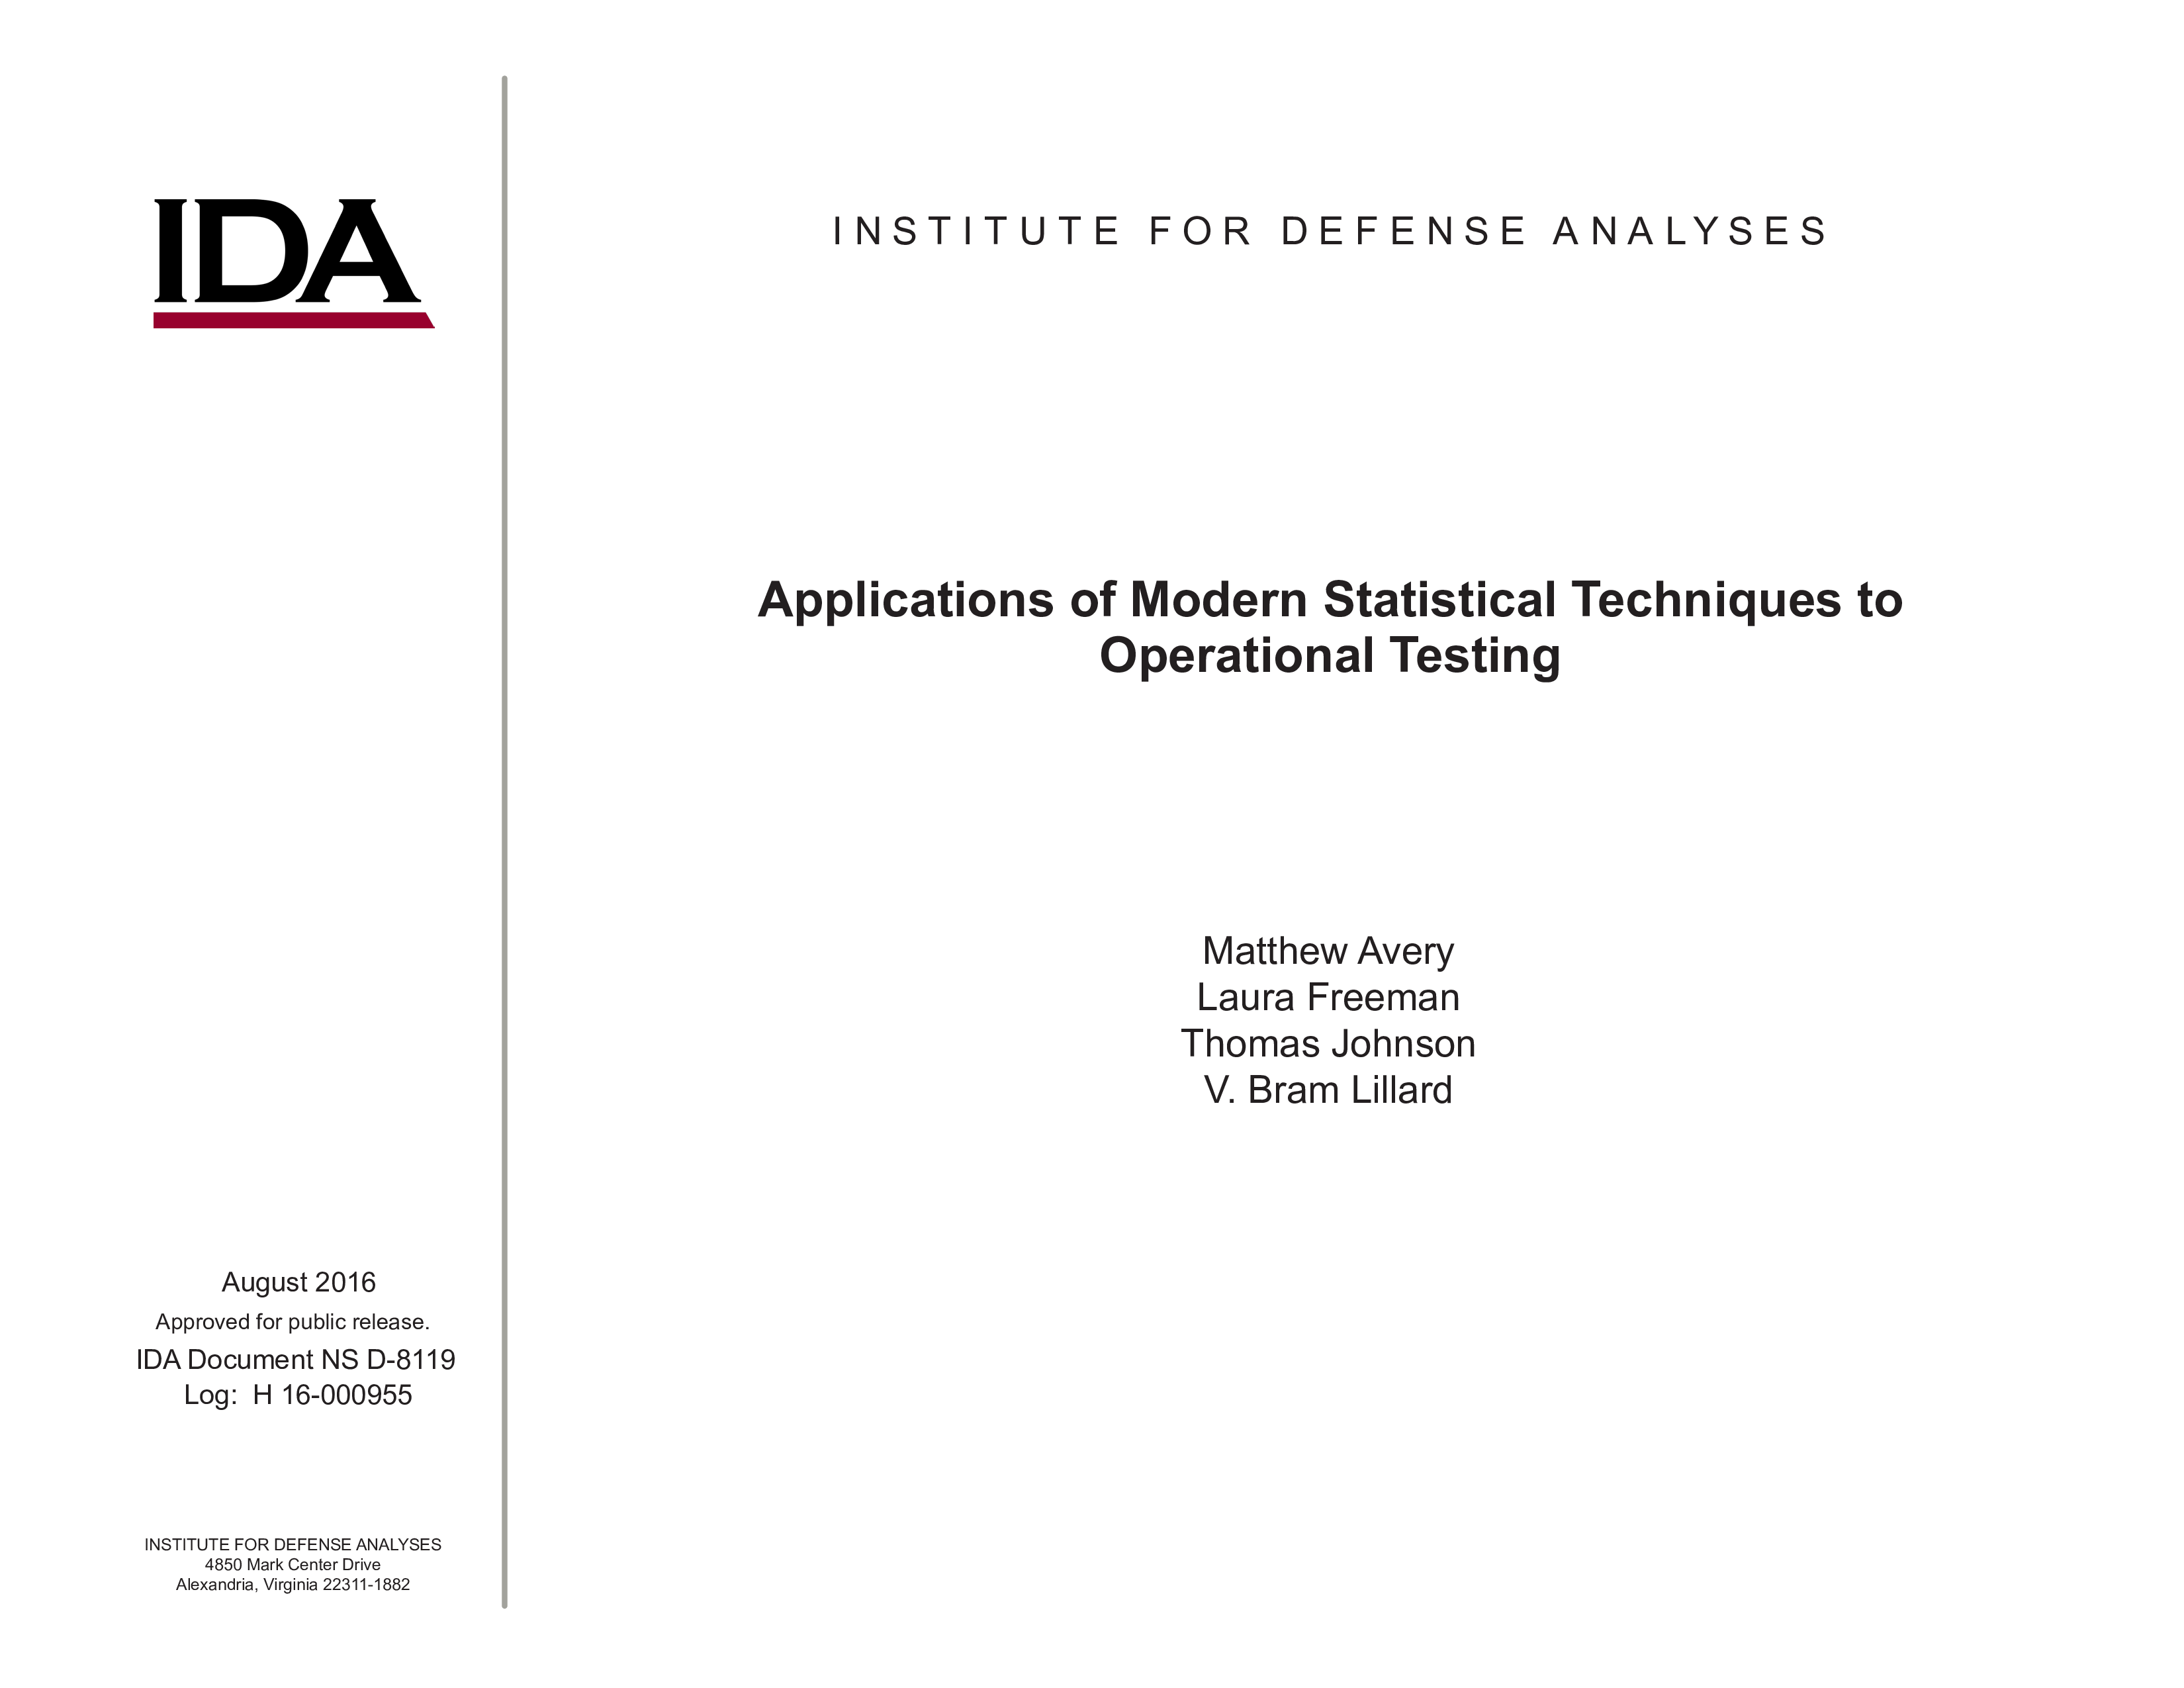 Applications of Modern Statistical Techniques to Operational Testing